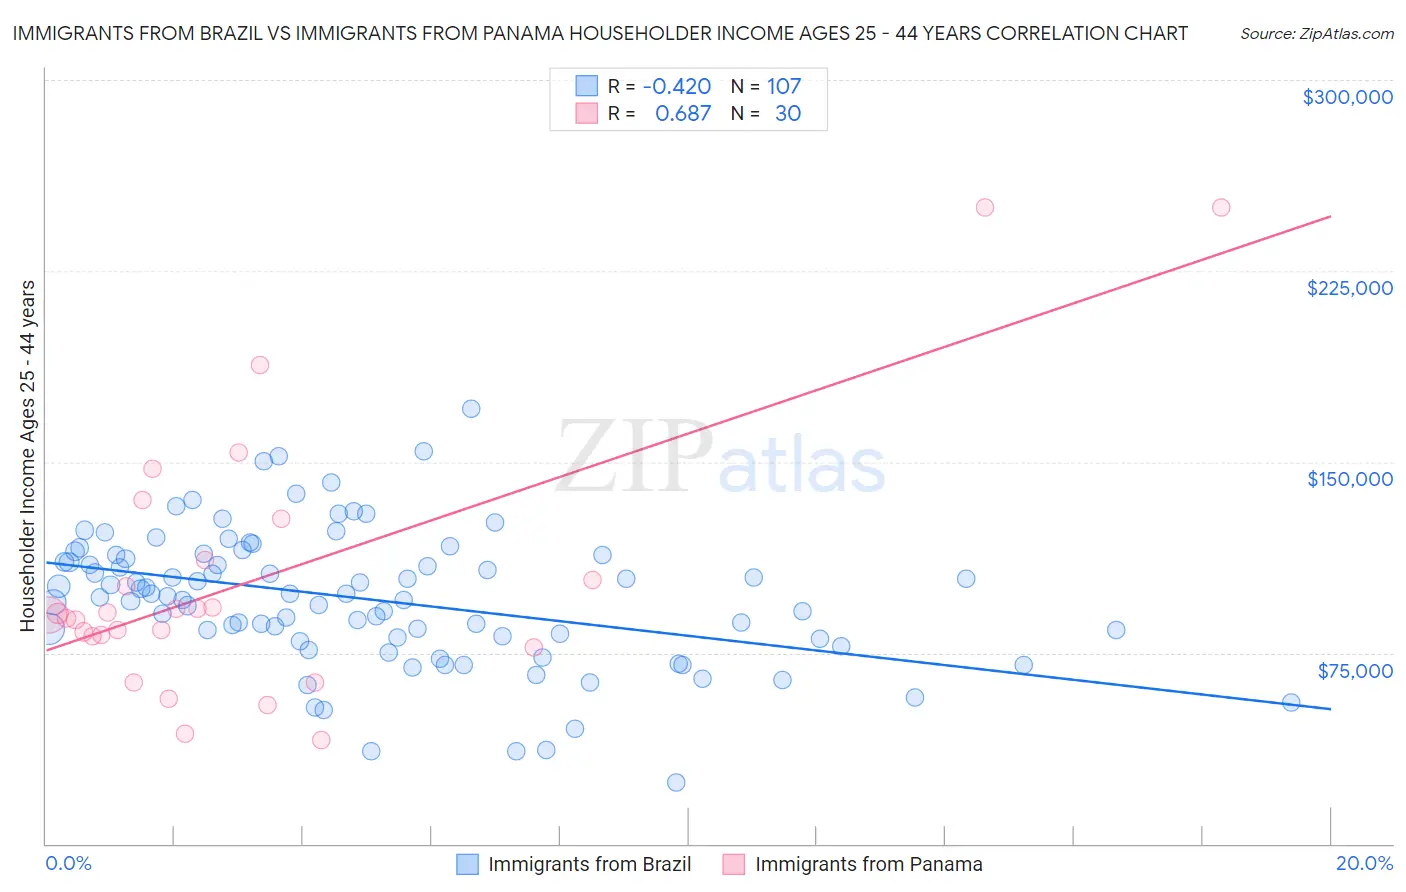 Immigrants from Brazil vs Immigrants from Panama Householder Income Ages 25 - 44 years